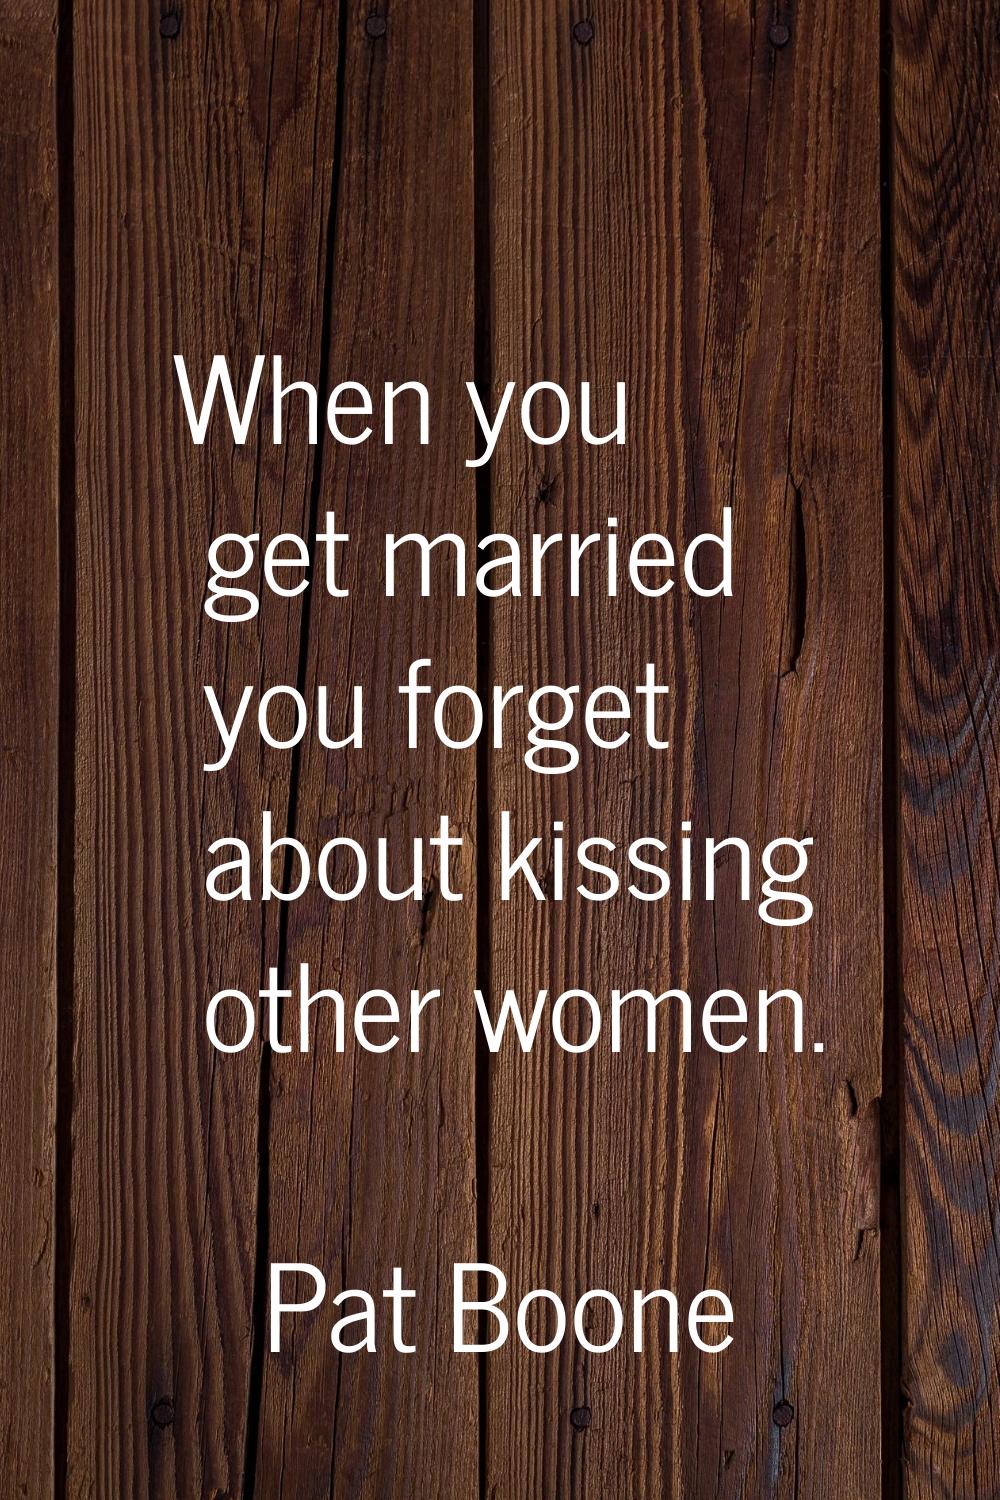 When you get married you forget about kissing other women.